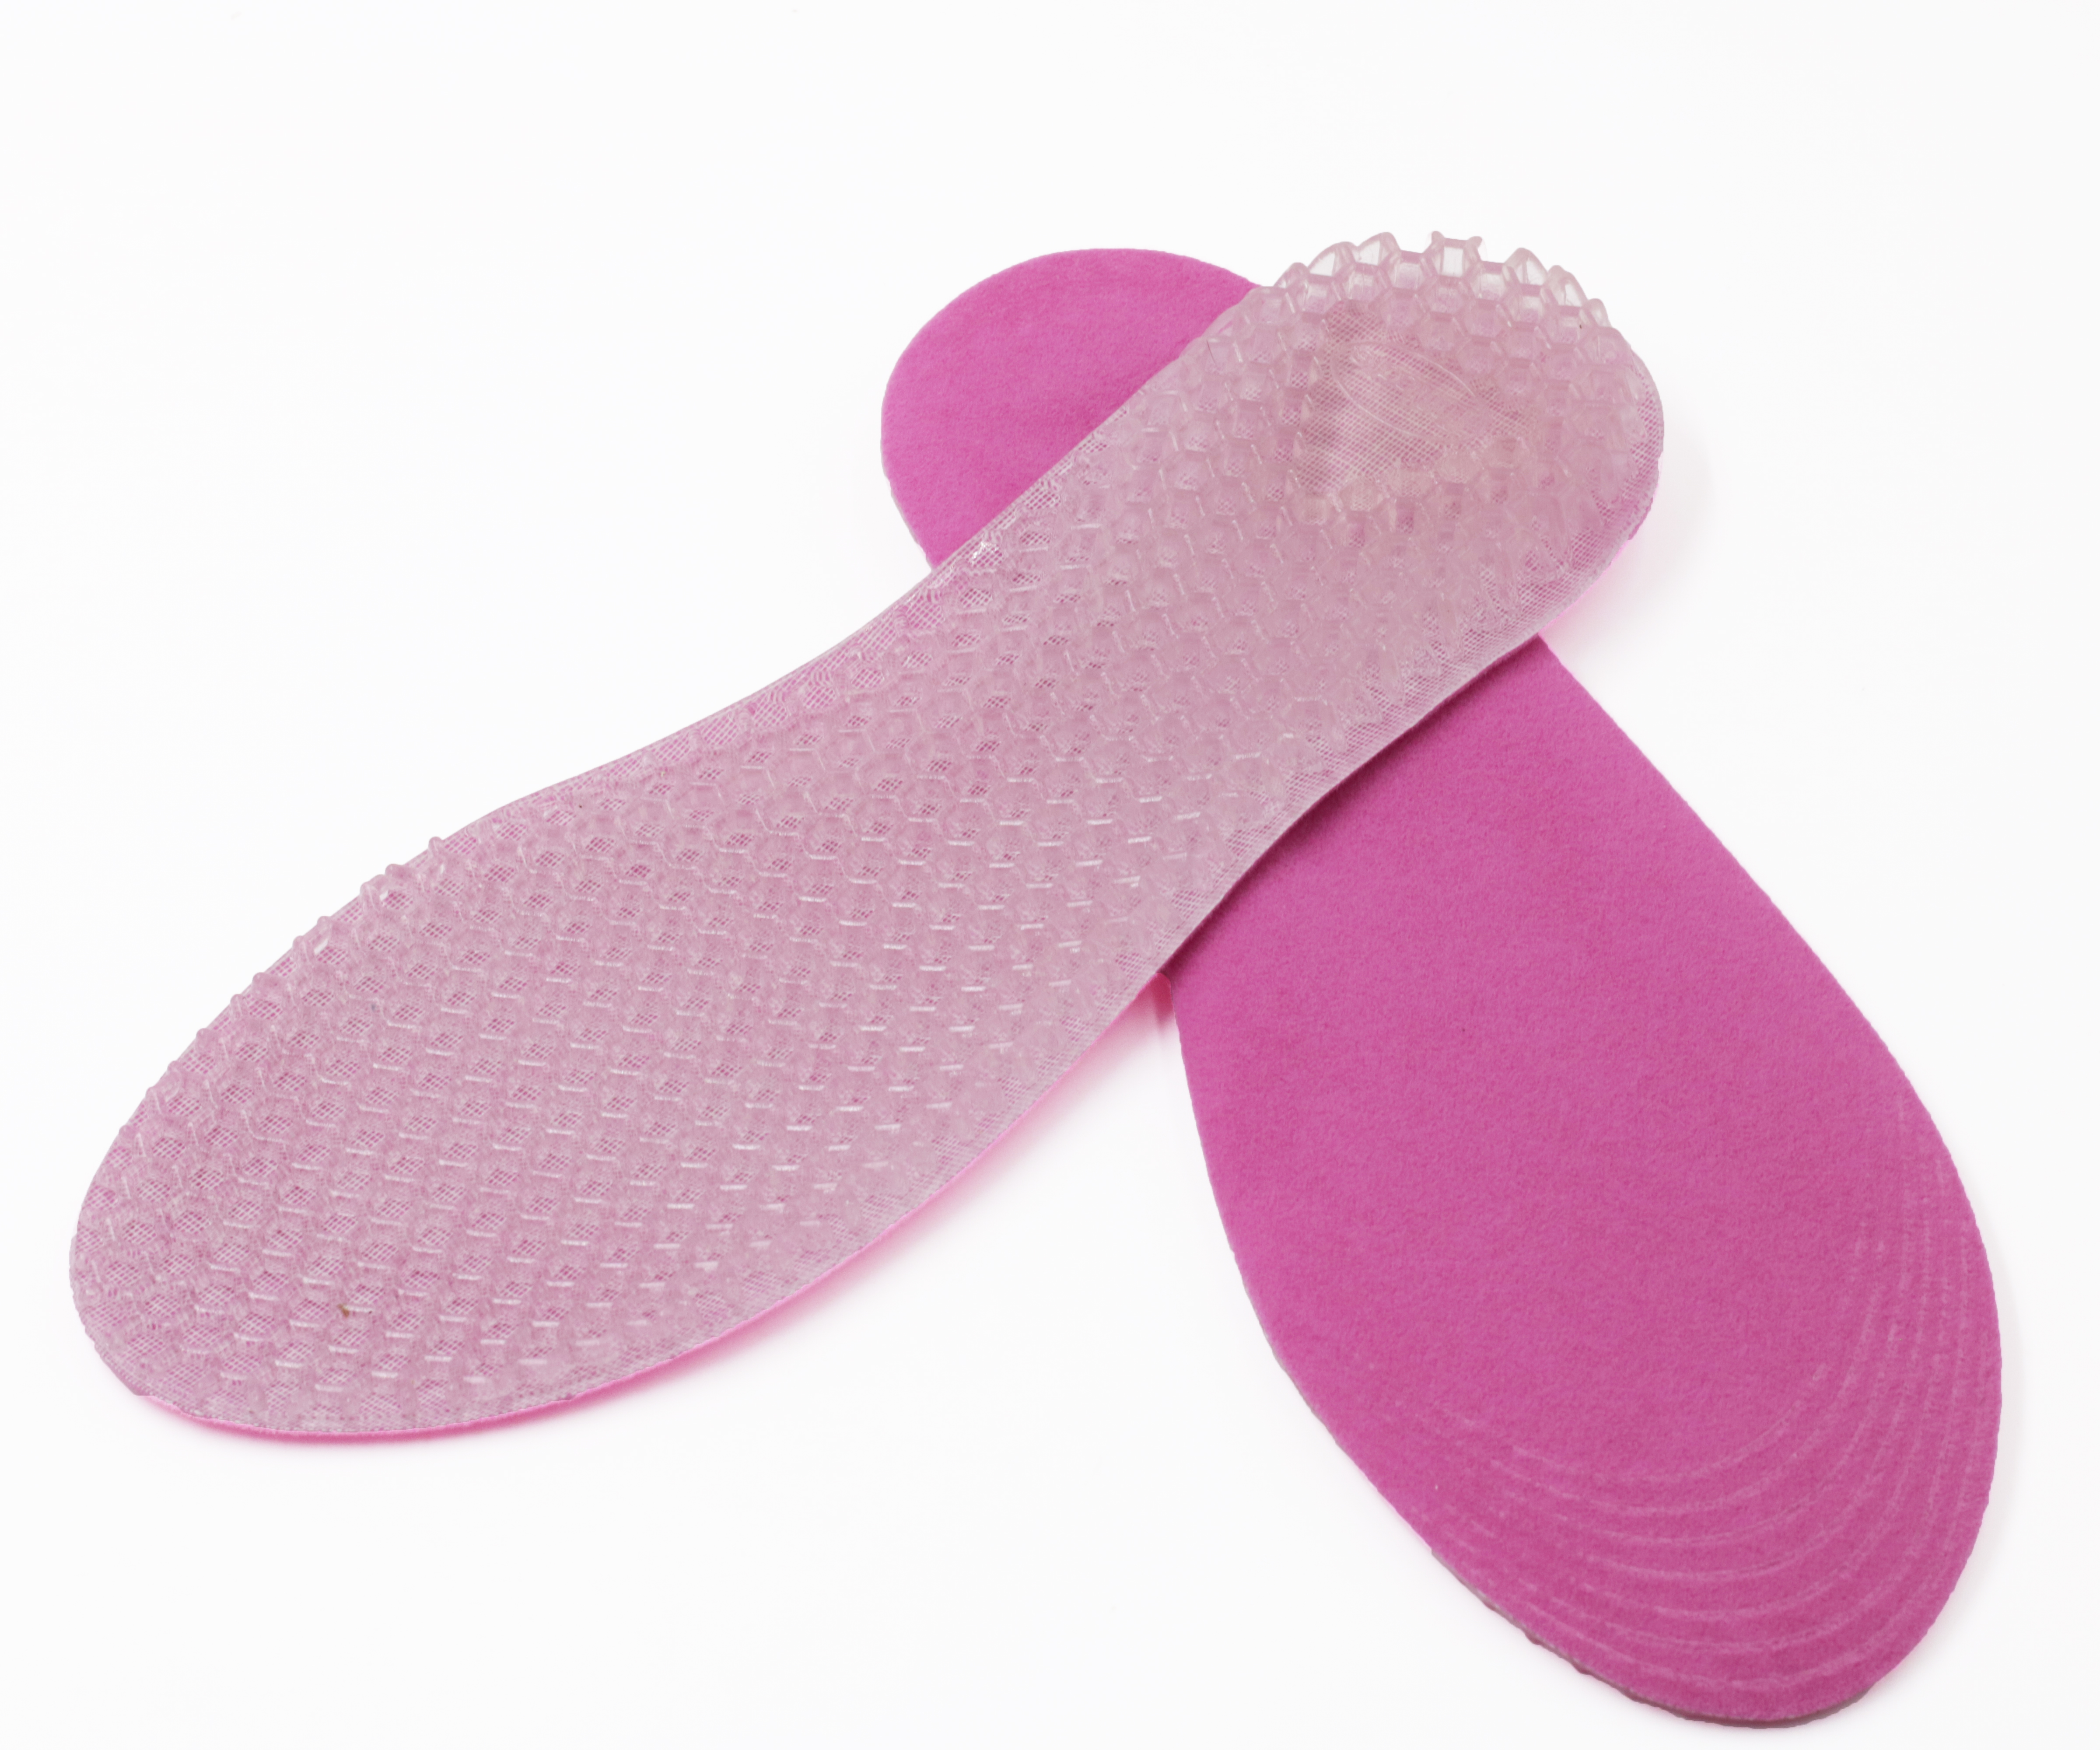 FM-301 Cuttable Adjustable Foot Massage Sports Honeycomb Design Gel Insoles for Foot Pain Relief 